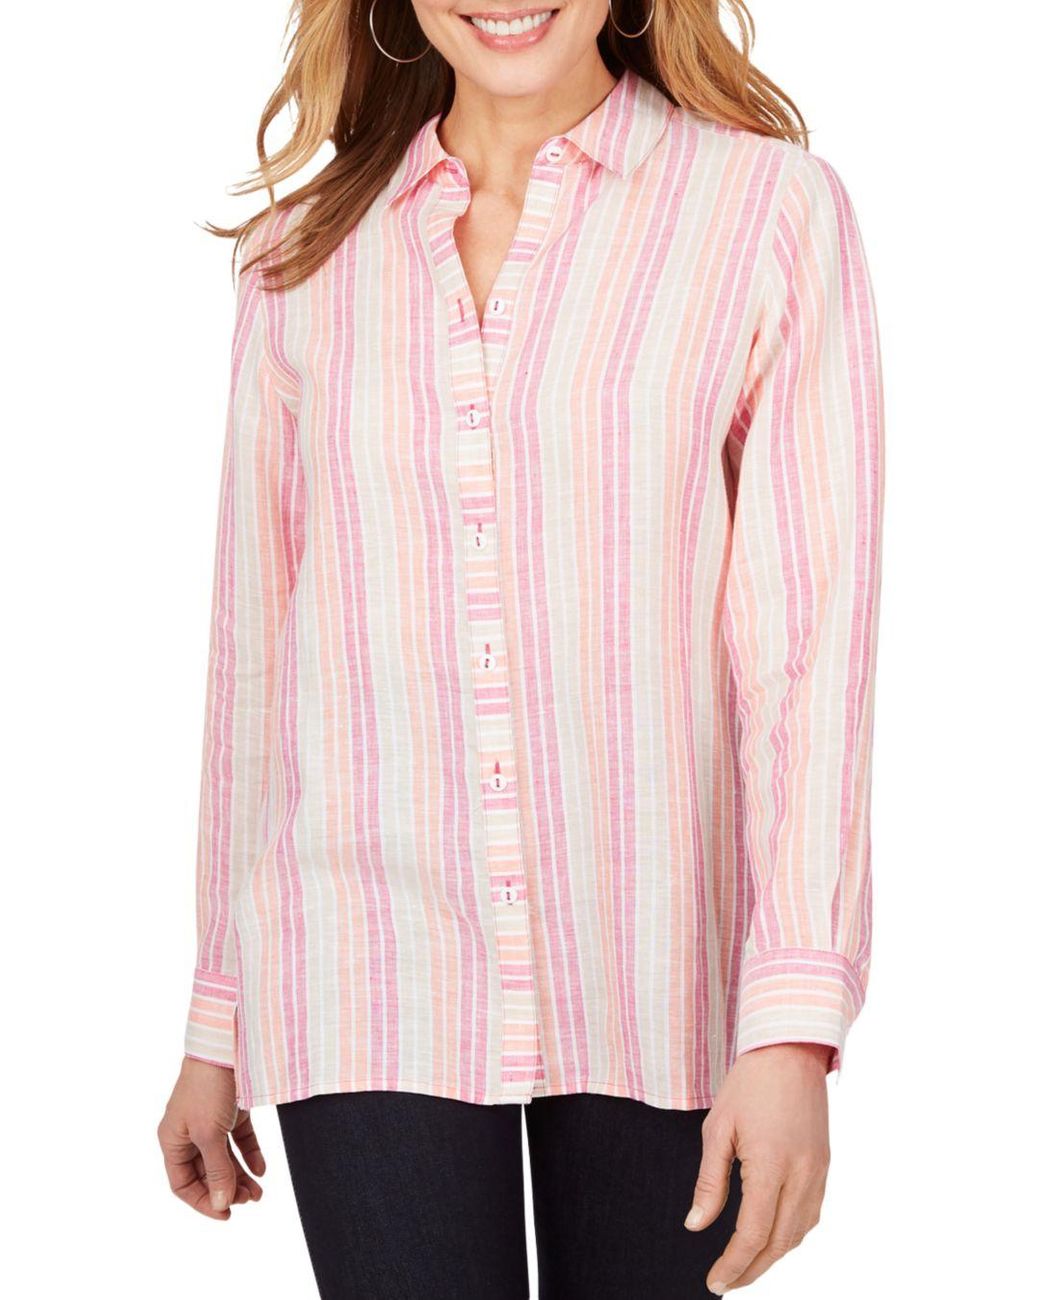 Foxcroft Journey Striped Easy Care Linen Shirt in Pink - Lyst